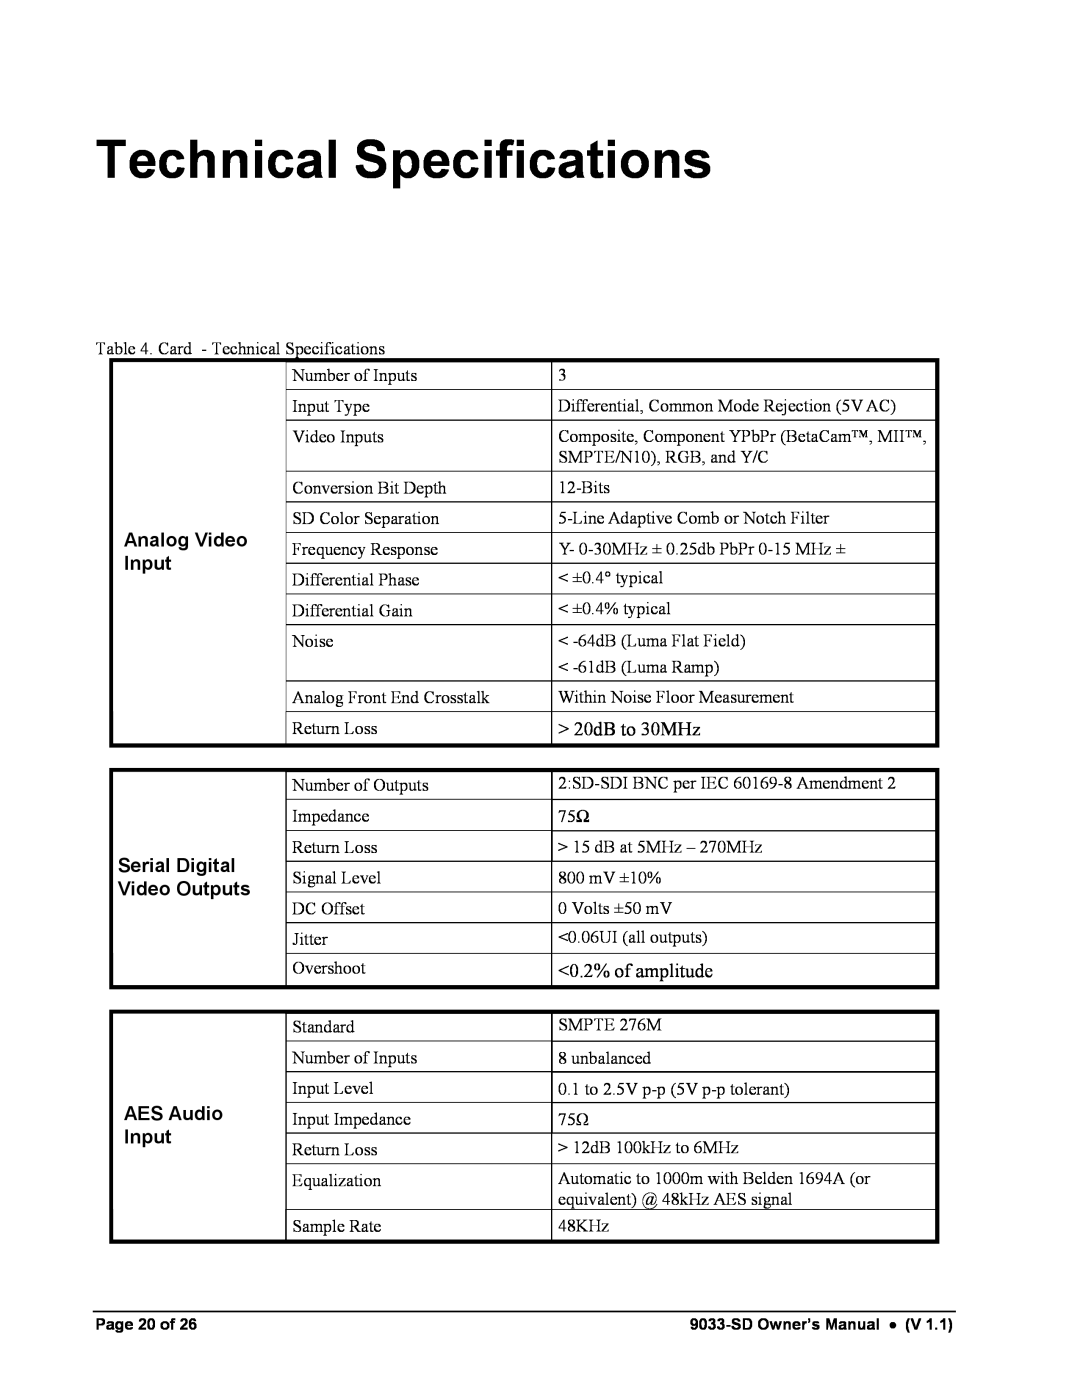 Cobalt Networks 9033-SD owner manual Technical Specifications, 20dB to 30MHz, 0.2% of amplitude 